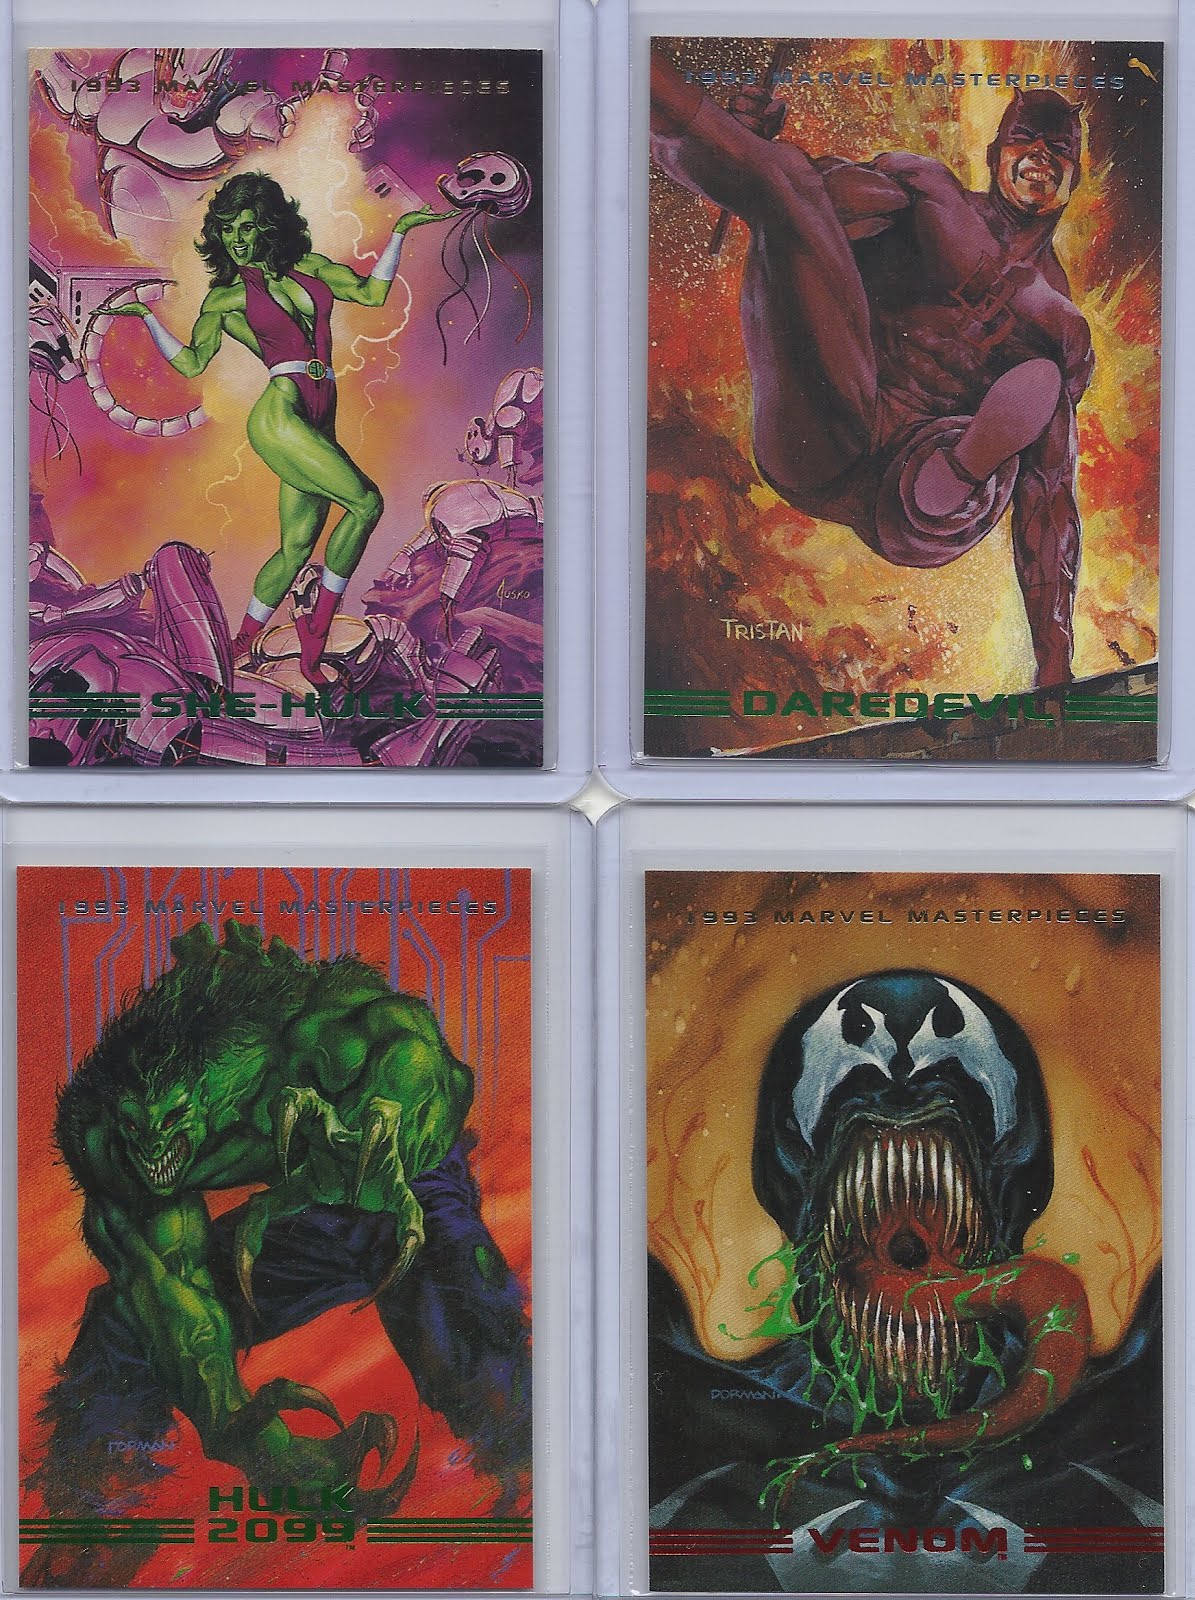 1993 MARVEL MASTERPIECES Prototype and Promo Cards